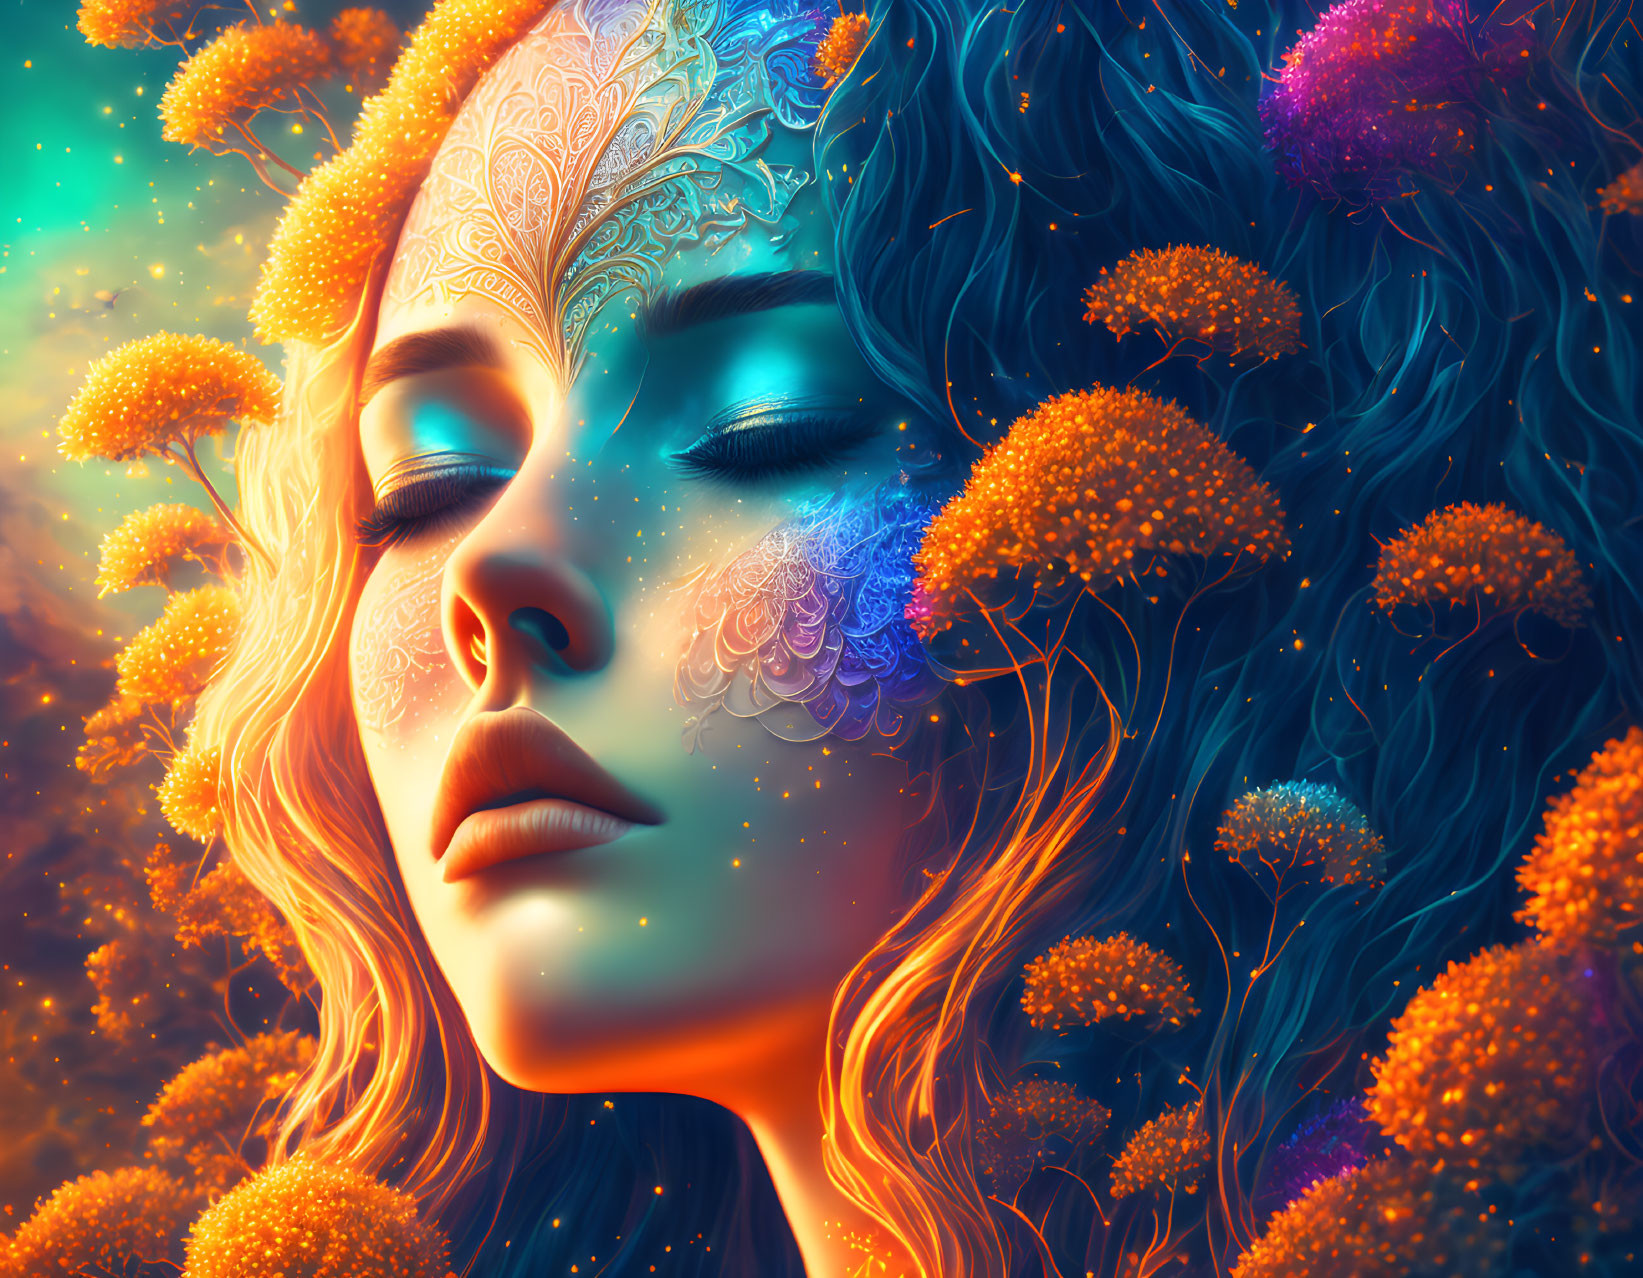 Colorful digital artwork: Woman with blue hair and ornate patterns, surrounded by vibrant flora